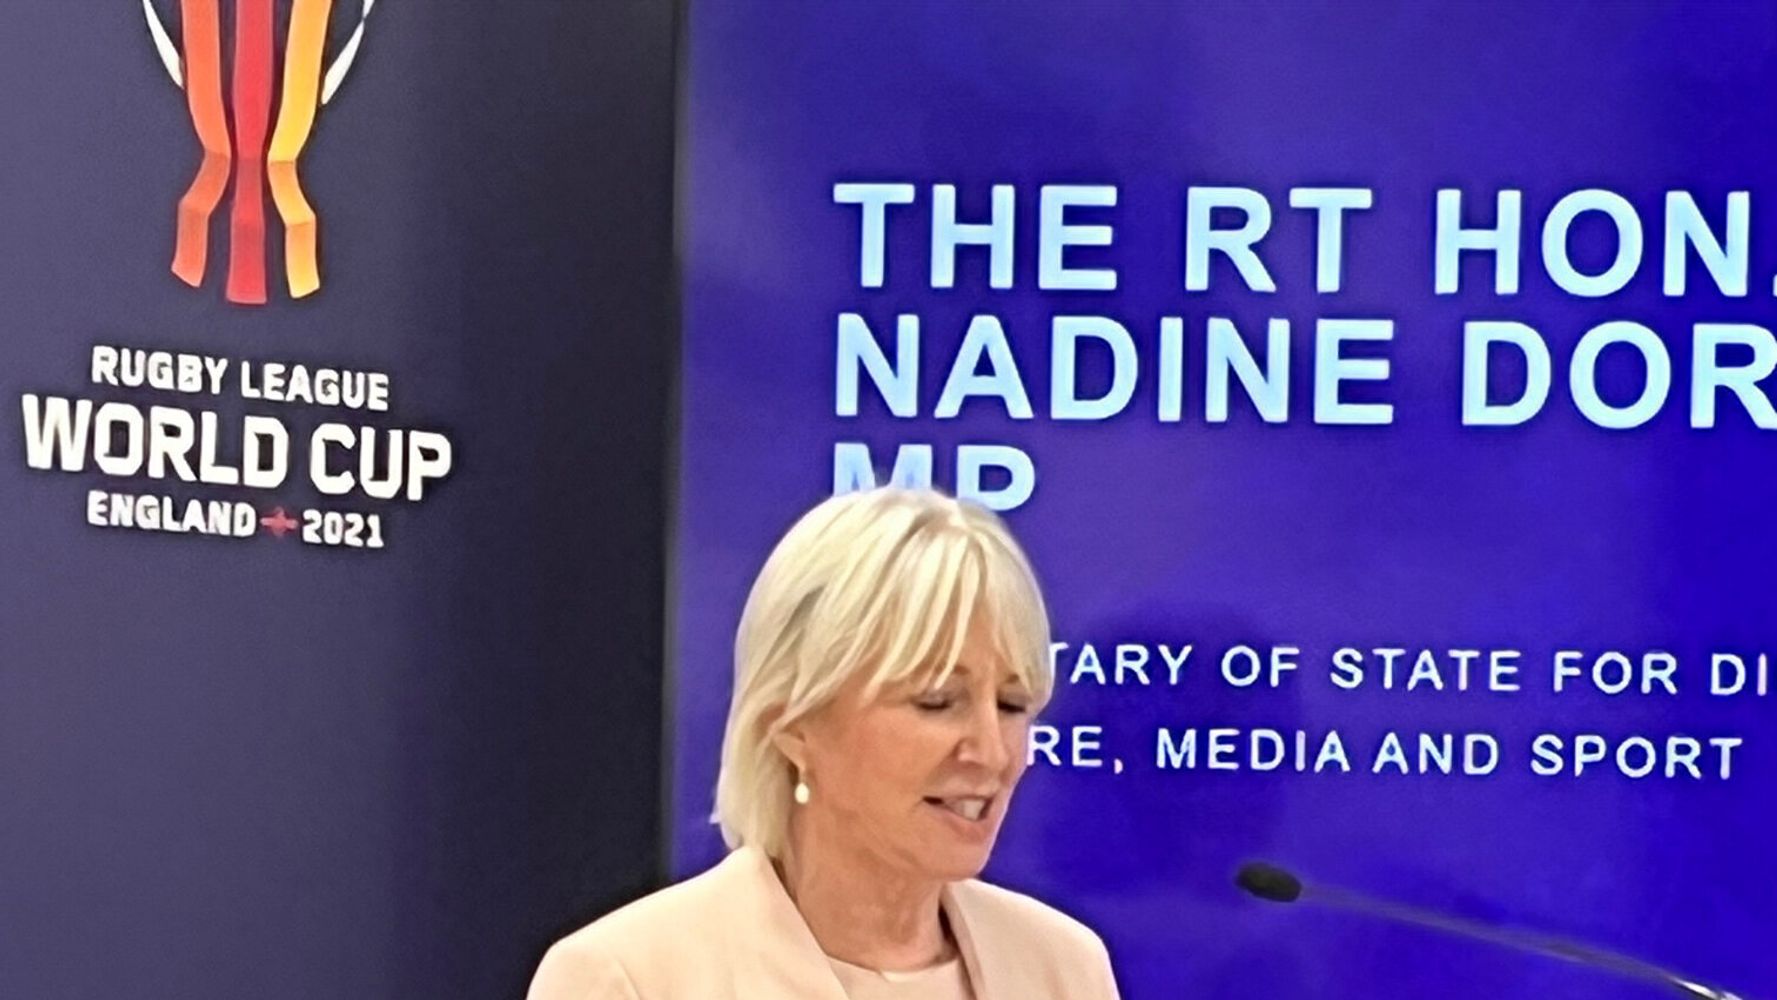 Gaffe-Prone Nadine Dorries Drops The Ball With Rugby League Clanger